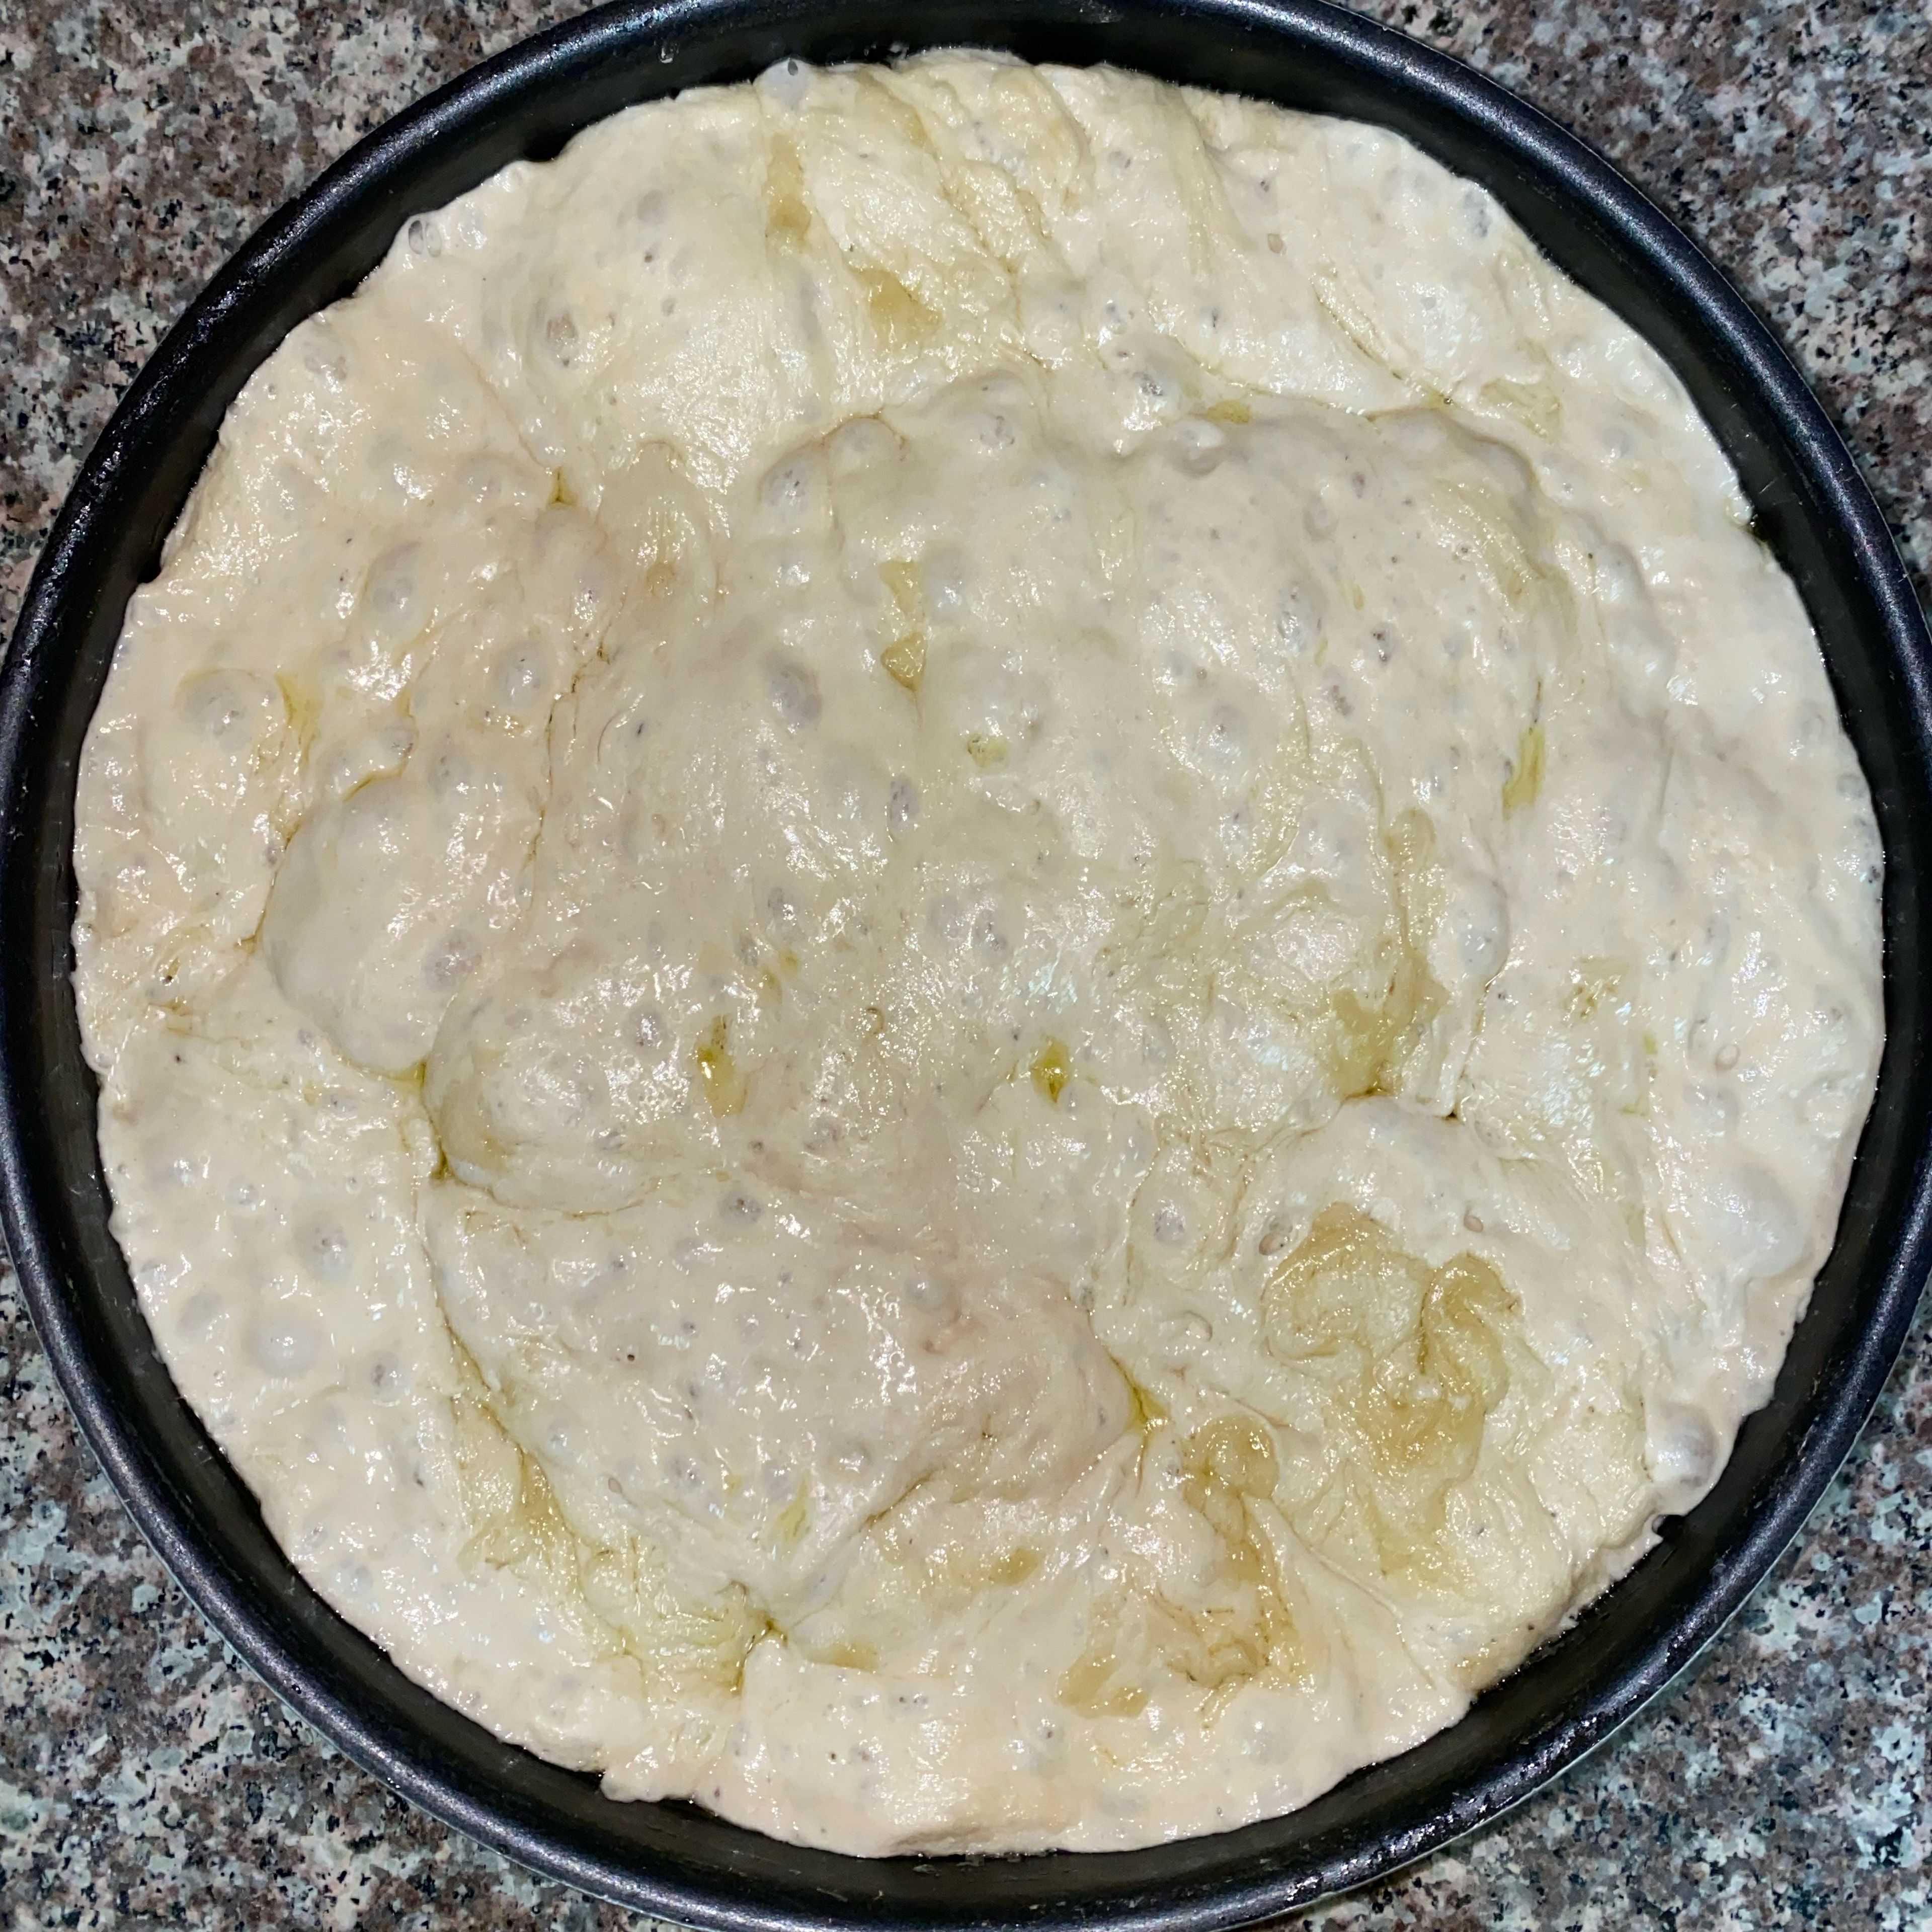 Using a rubber spatula, gently stir a tablespoon of olive oil into the dough until well combined and cover with plastic wrap again, setting it aside to proof for an additional 2 hours.